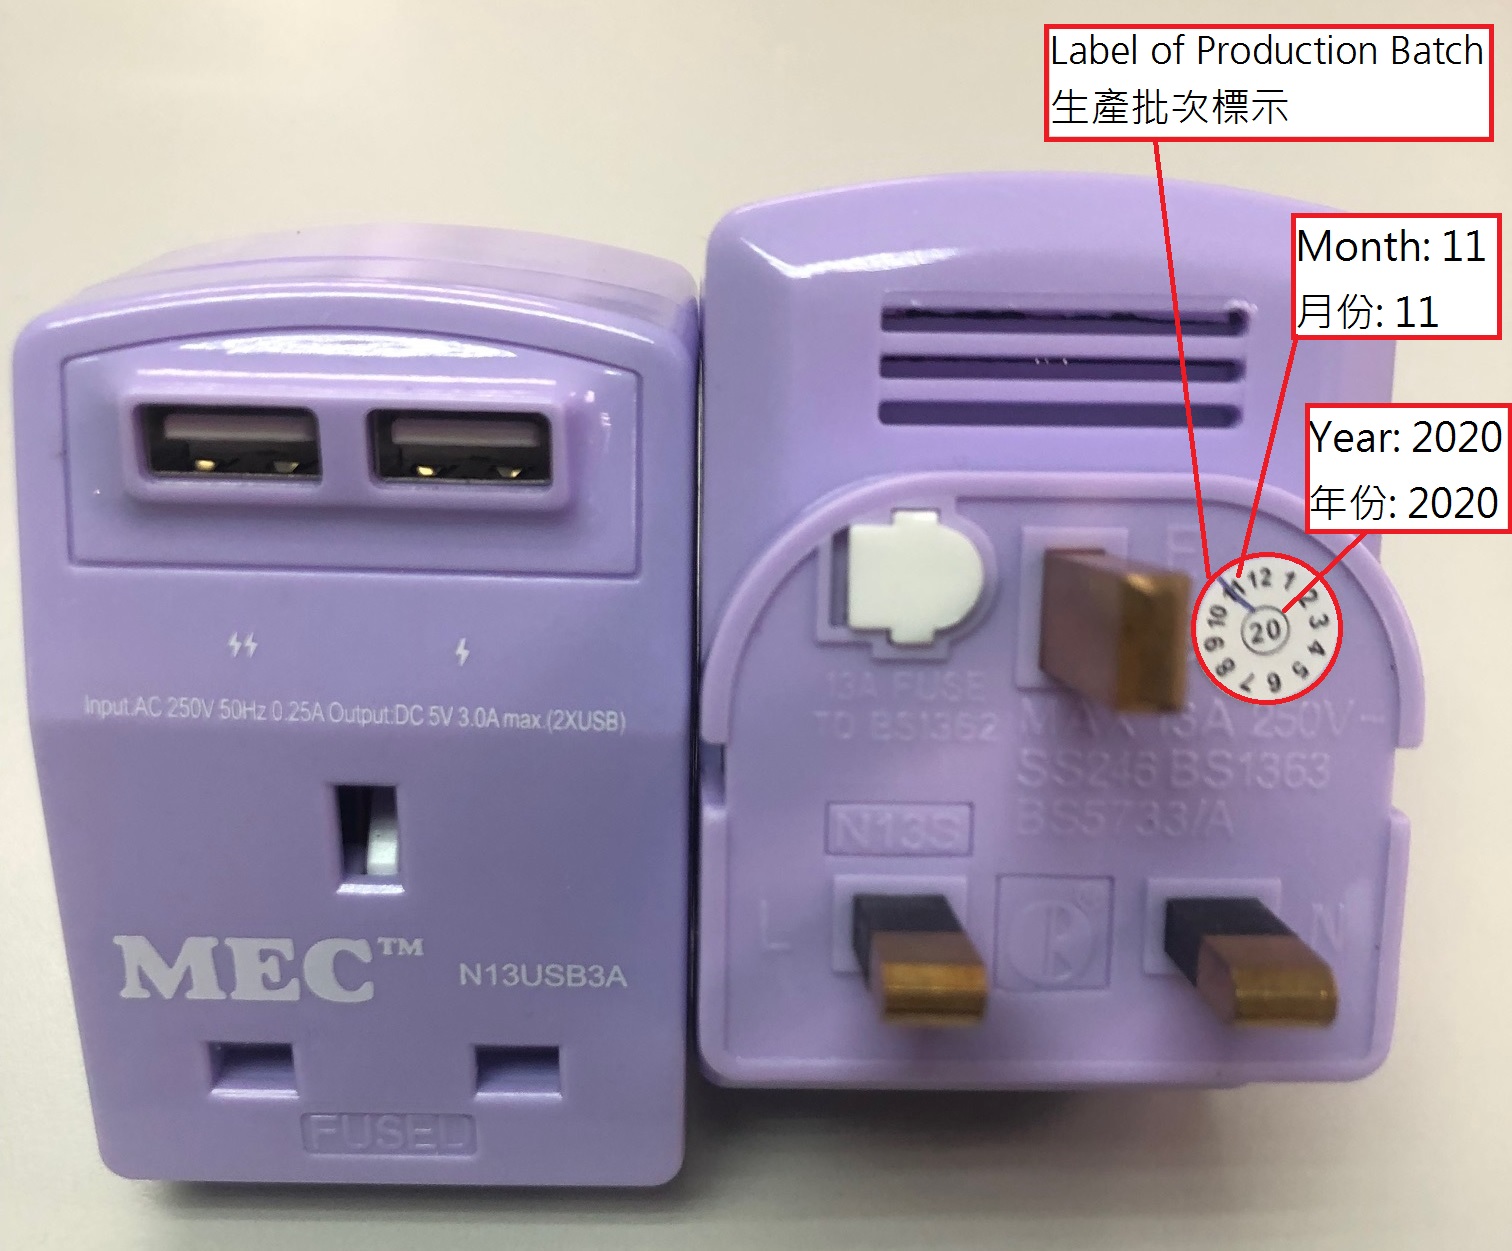 SUPER Adaptor Model N13USB3A in Purple with label_desription and its product markings